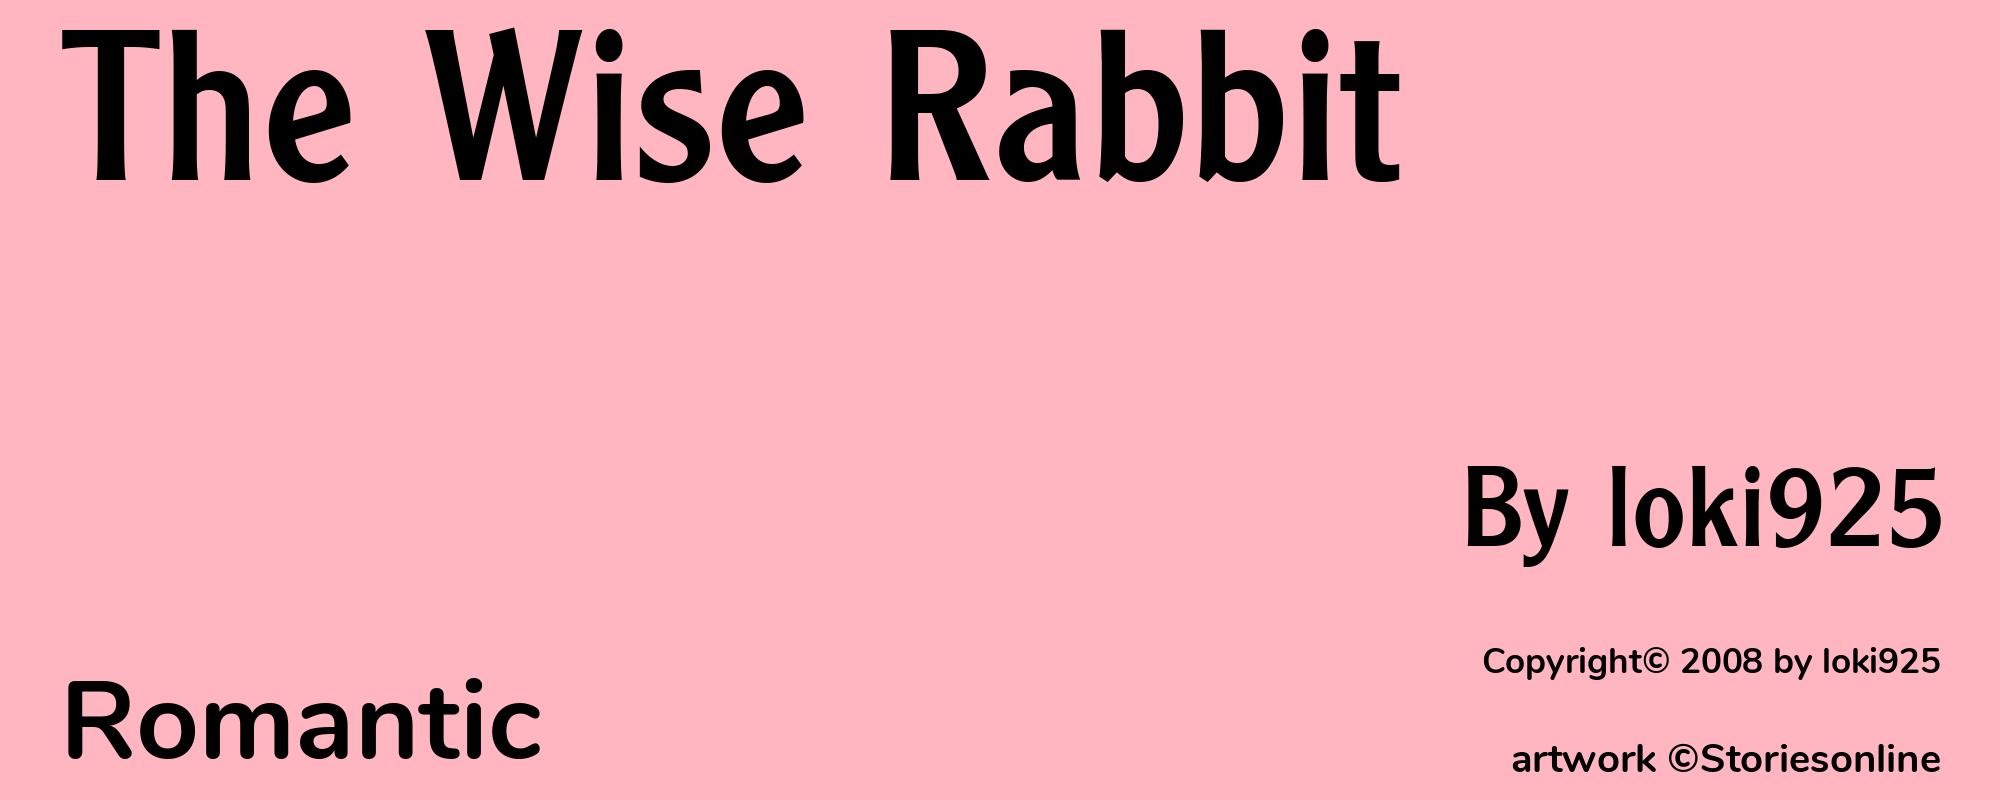 The Wise Rabbit - Cover